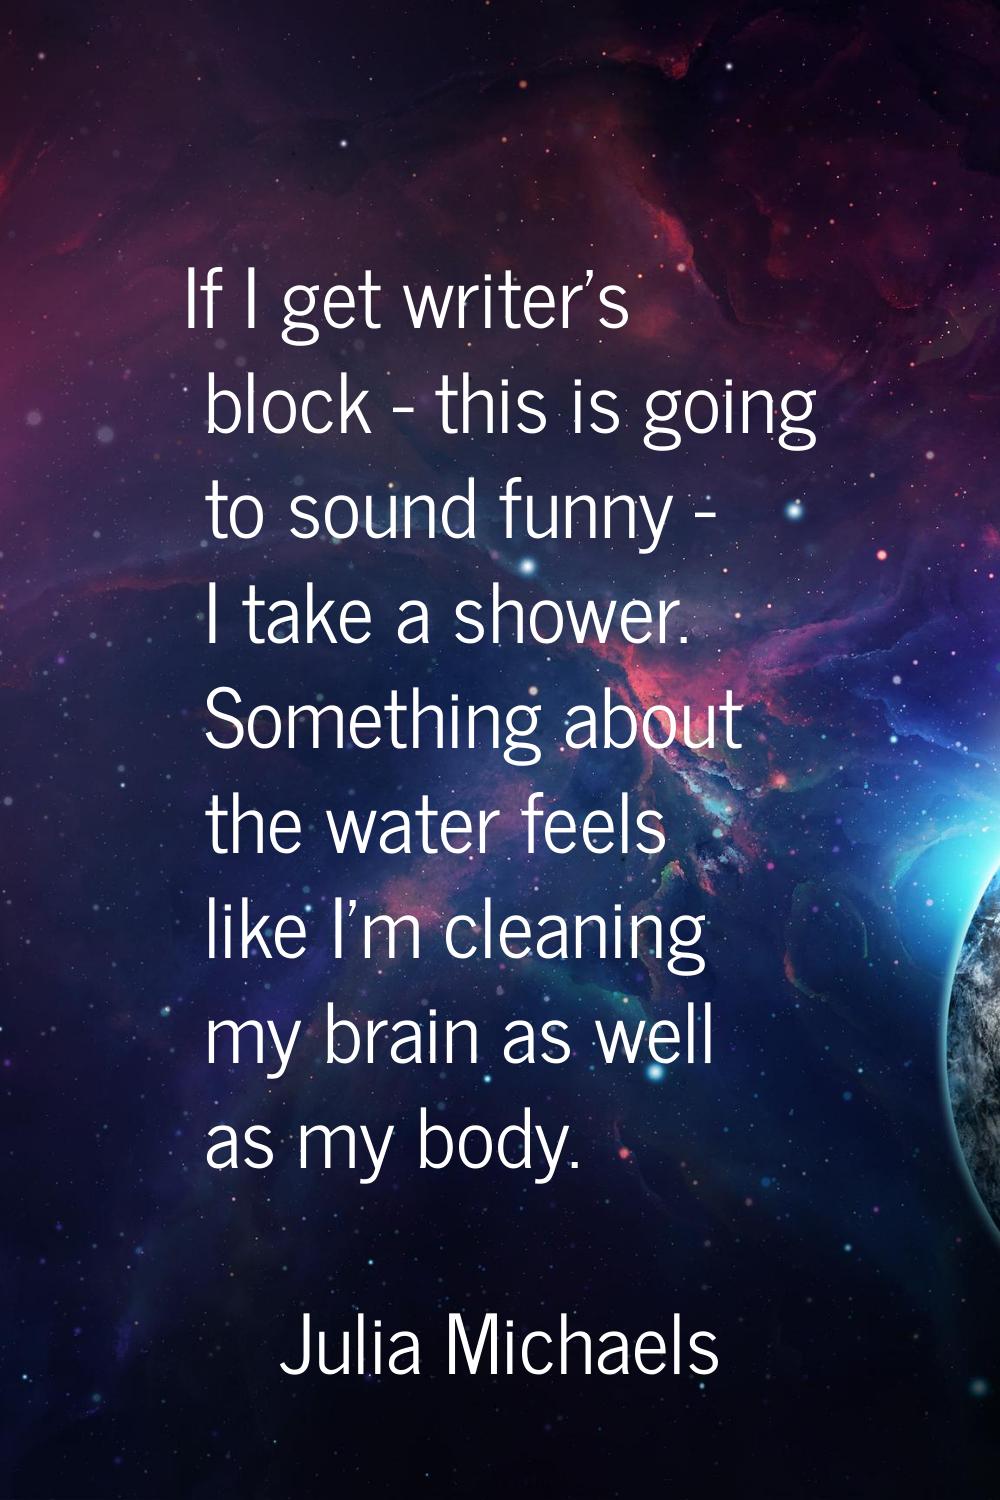 If I get writer's block - this is going to sound funny - I take a shower. Something about the water